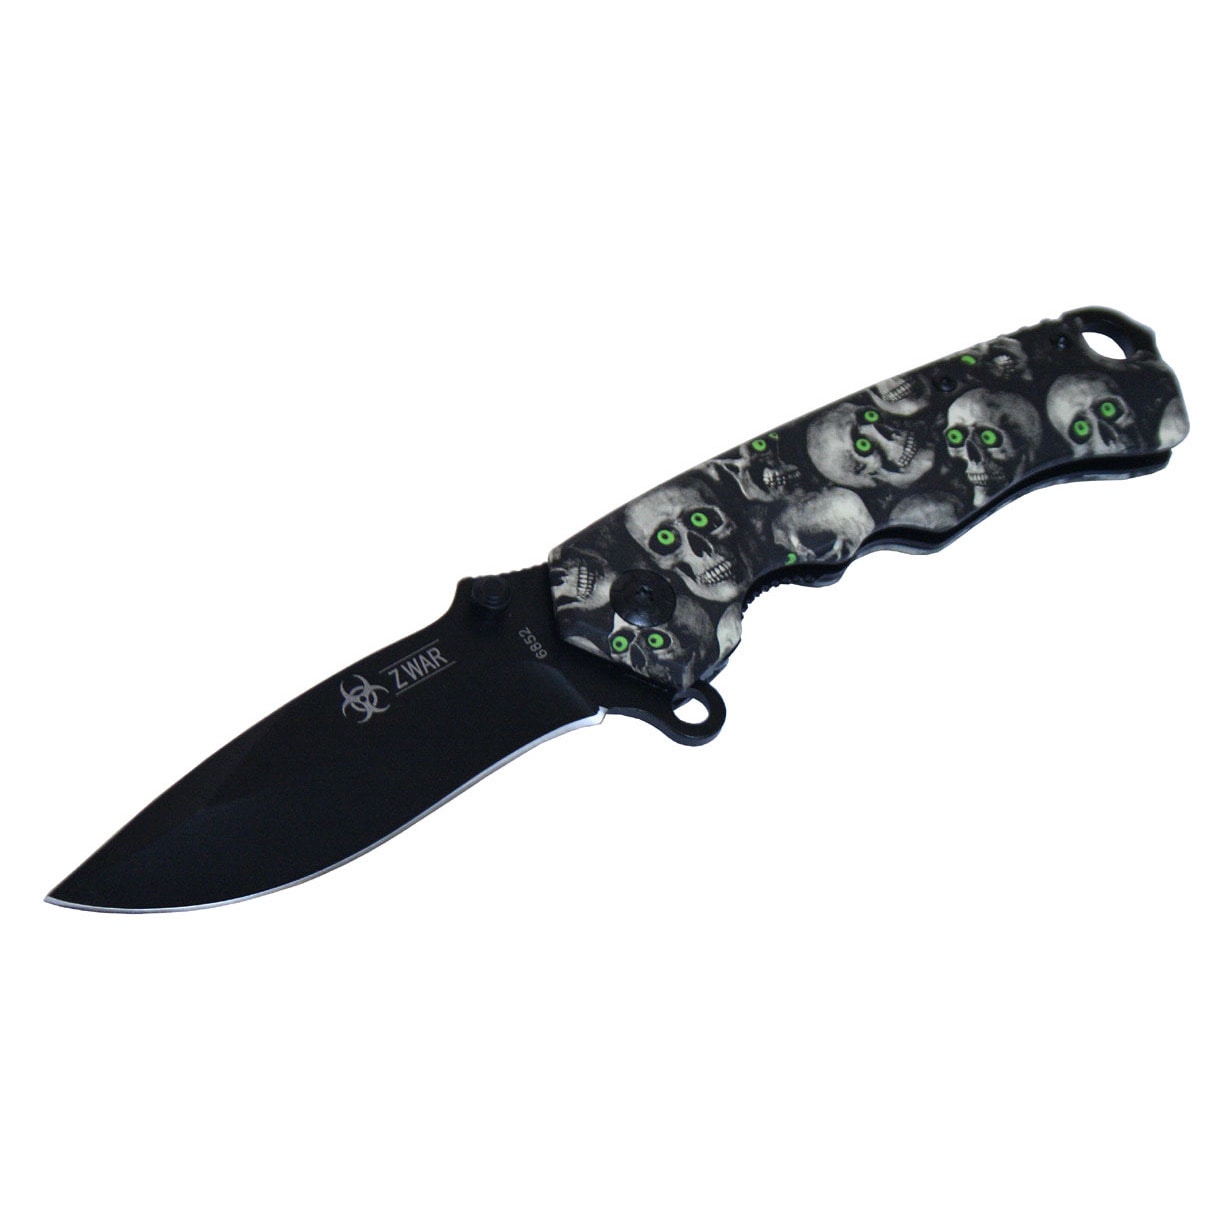 8 inch Gray/ Black Zombie Skull Design Spring Assisted Folding Knife (Grey/black/green Blade materials Stainless Steel Handle materials Metal Blade length 3.5 inchesHandle length 4.5 inchesWeight 1 pound Dimensions 8 inches long x 4 inches wide x 2 